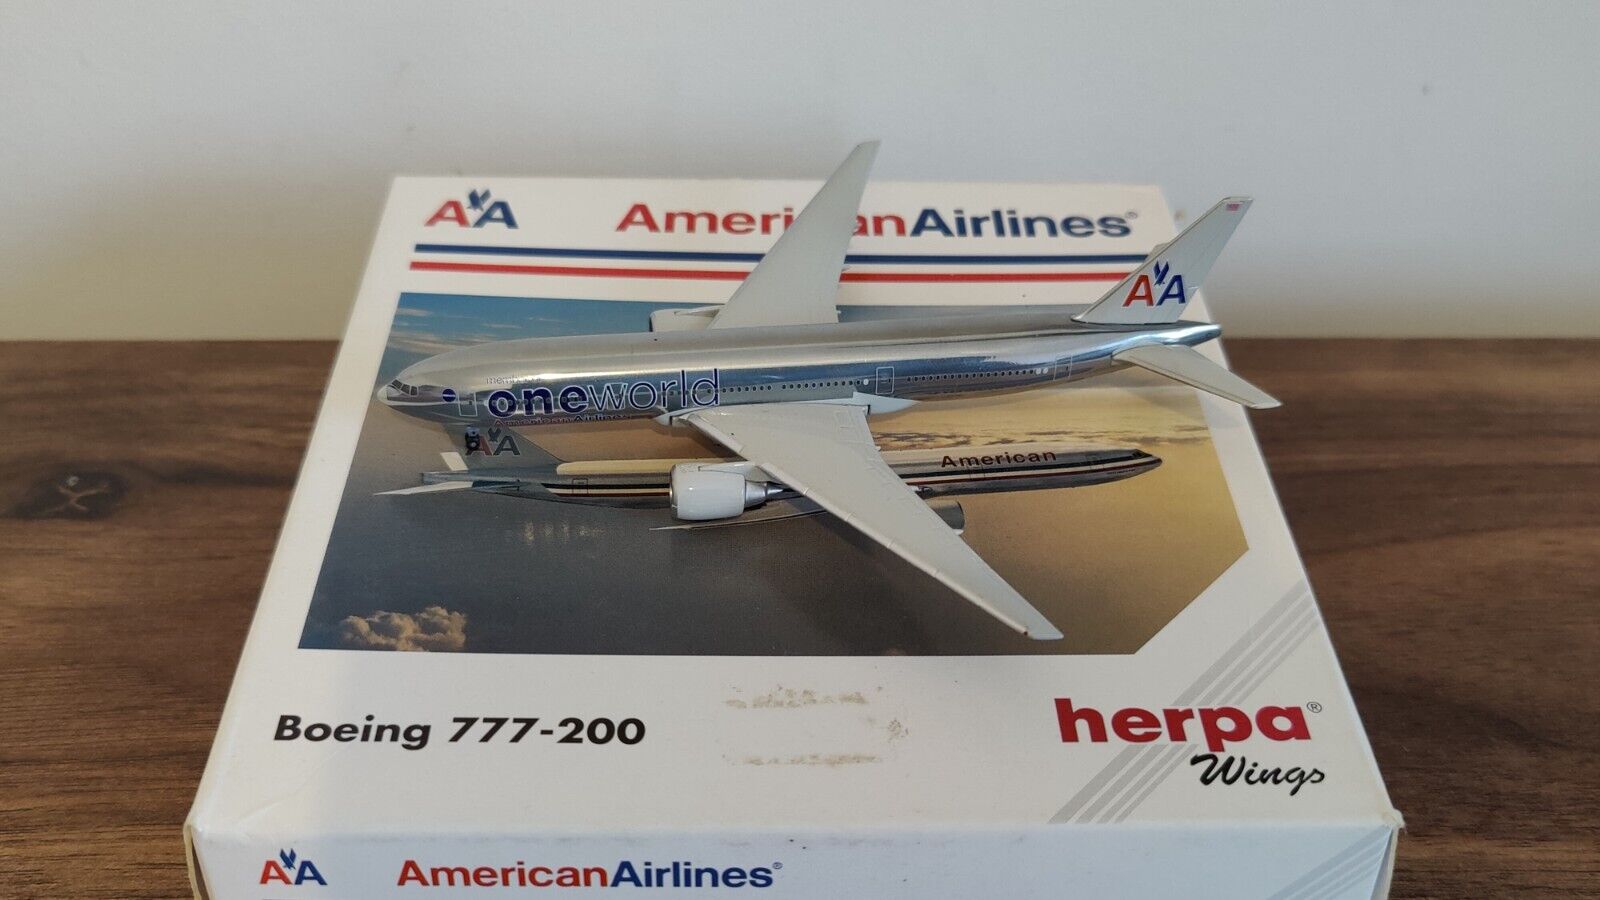 AMERICAN AIRLINES One World Boeing 777-200 Metal Model 1:500 Scale Herpa RARE